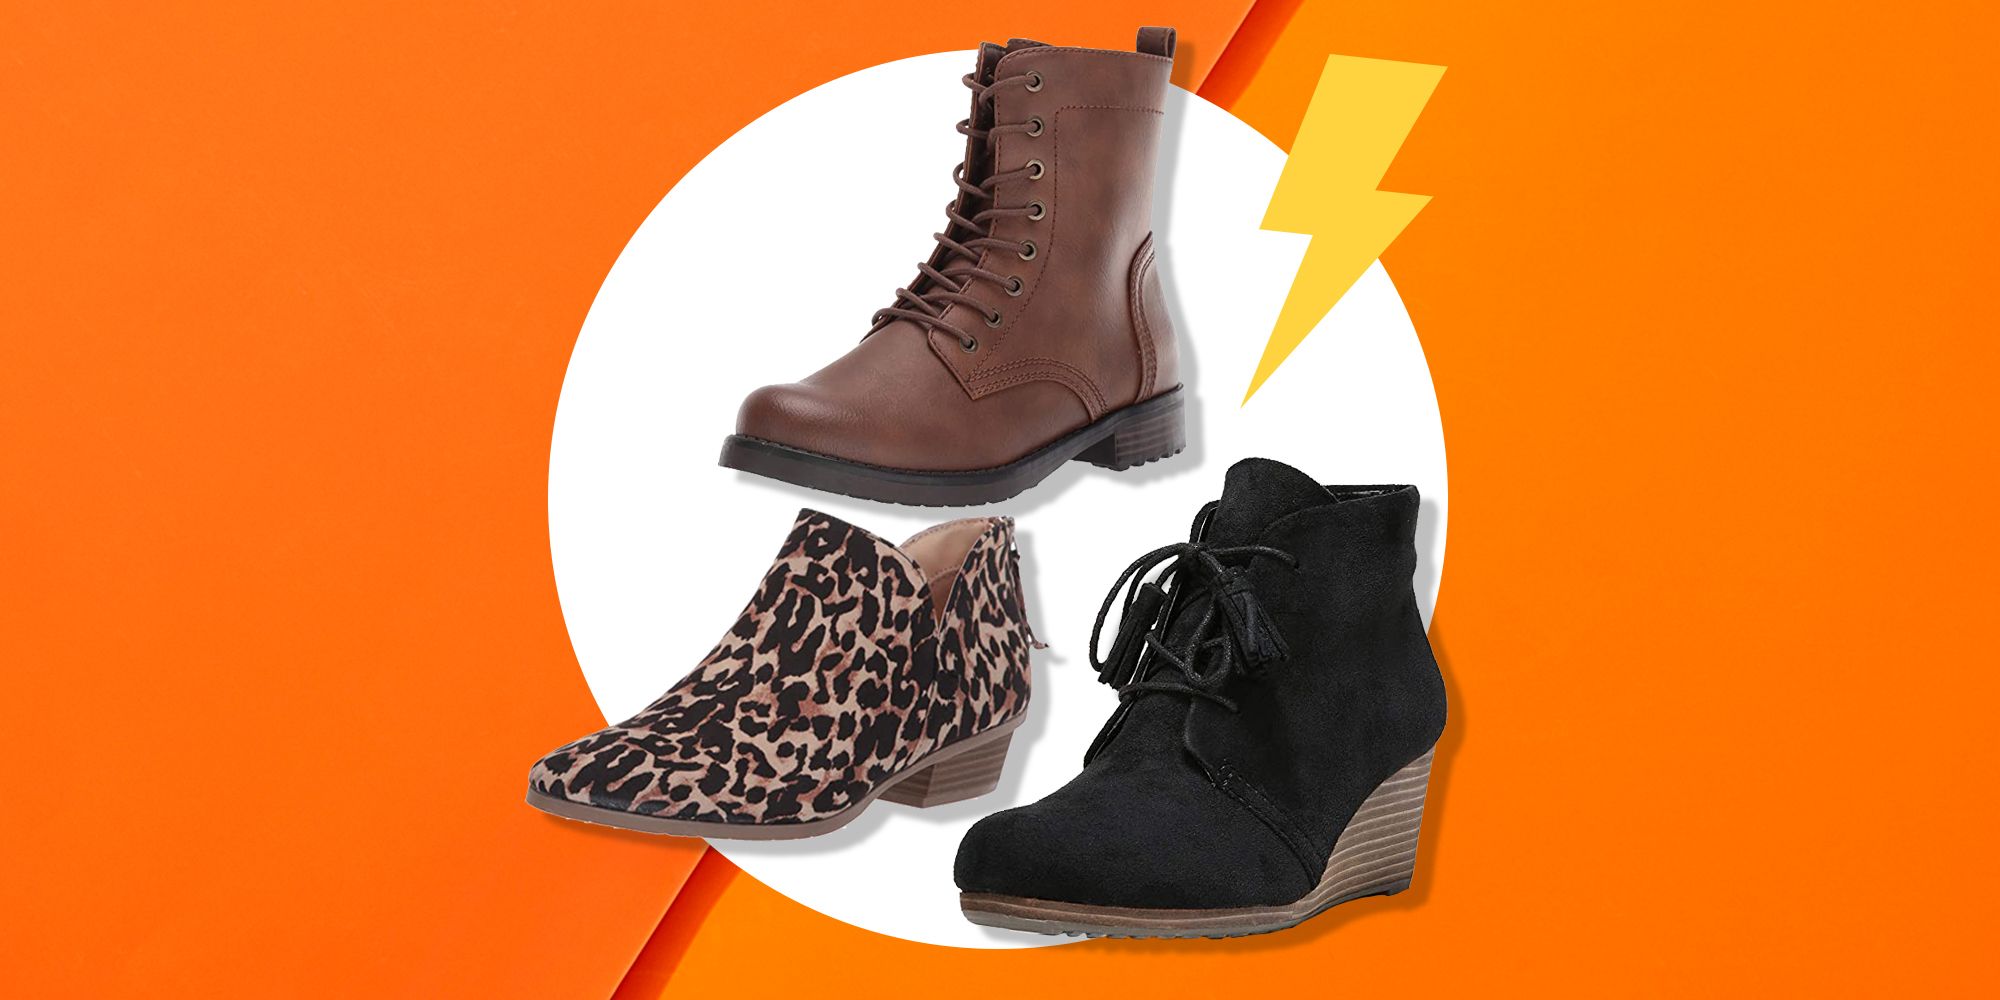 People Want To Walk In These Comfy, Stylish Ankle Boots All Day